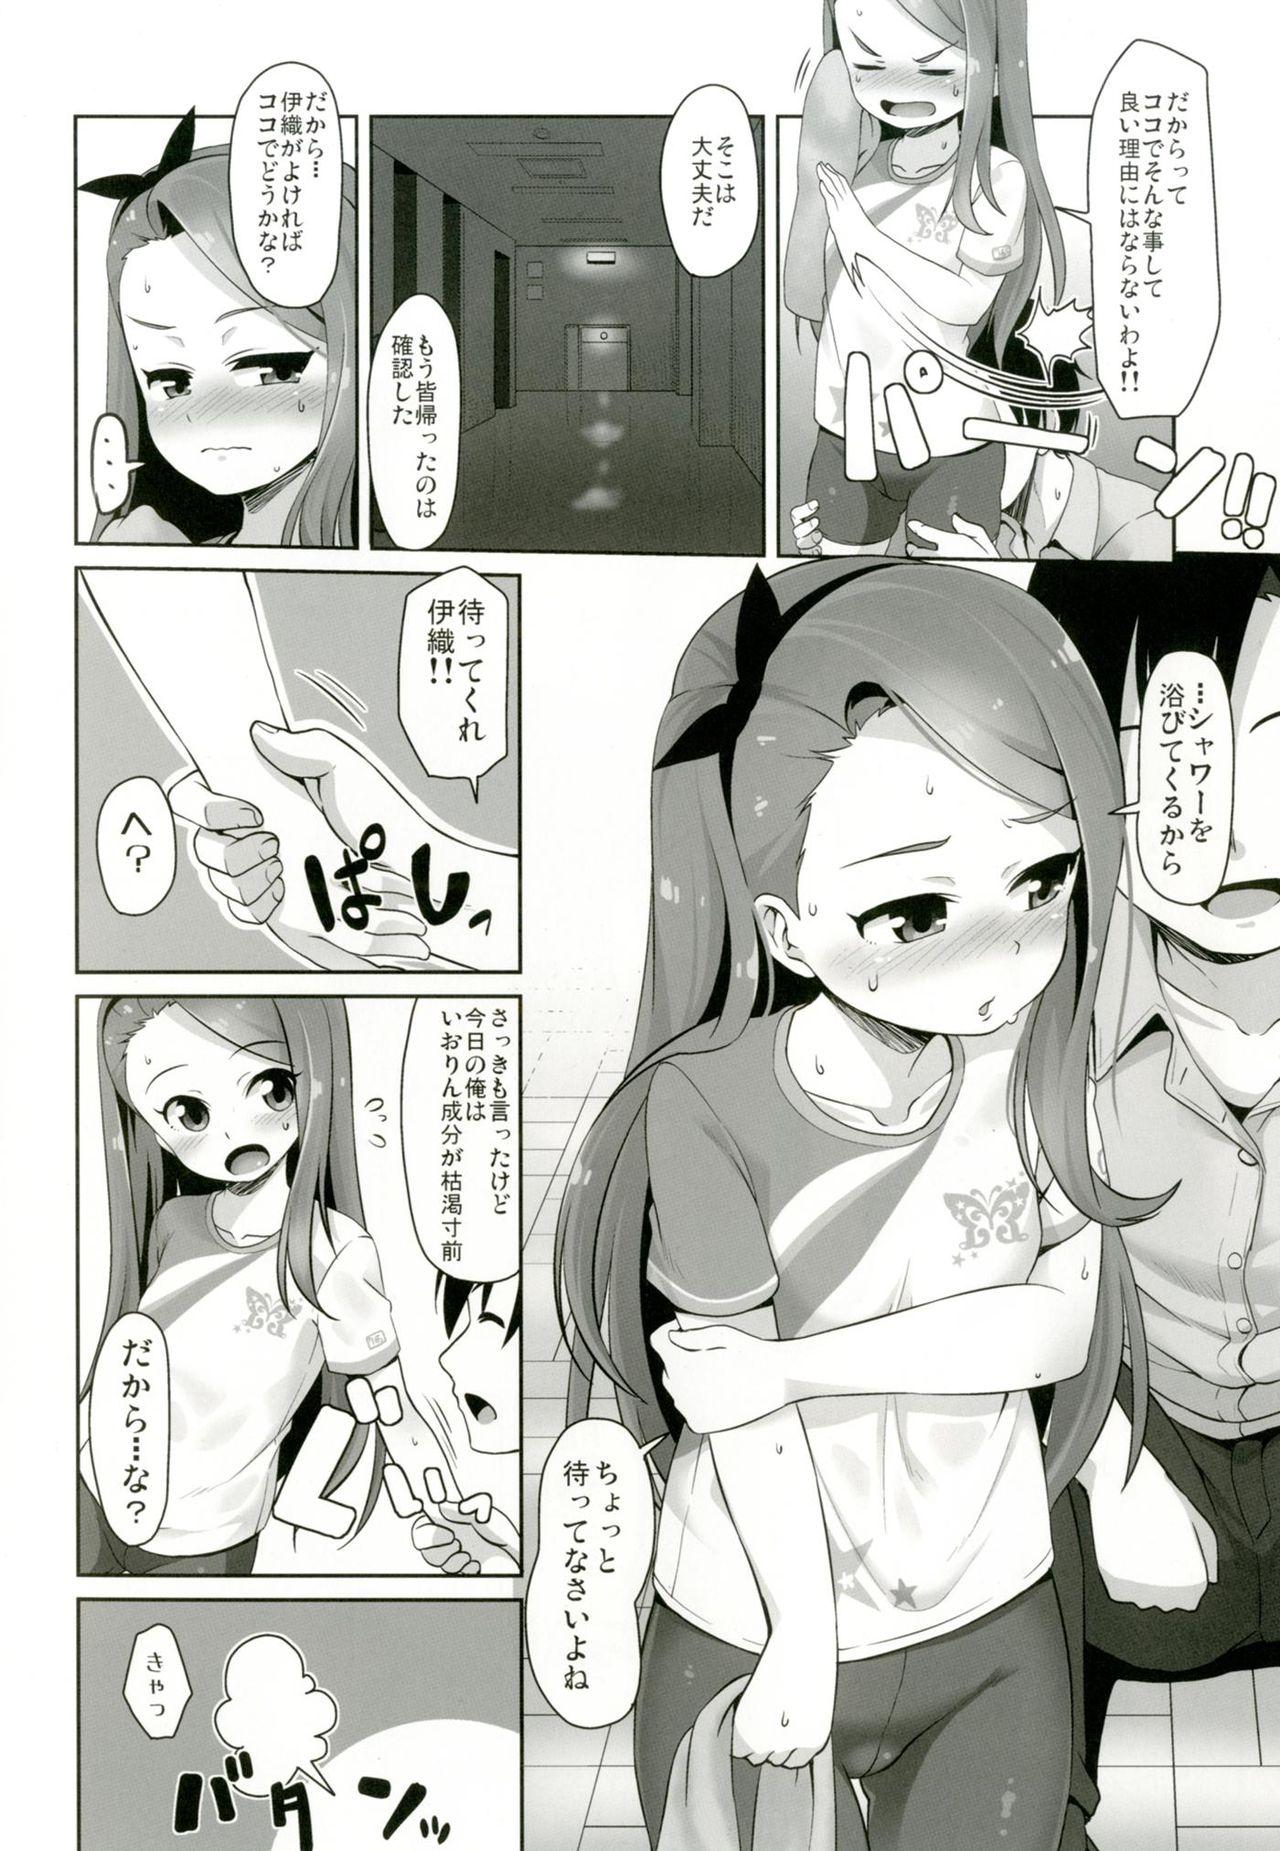 Friends iorix take in iorium - The idolmaster Kissing - Page 4